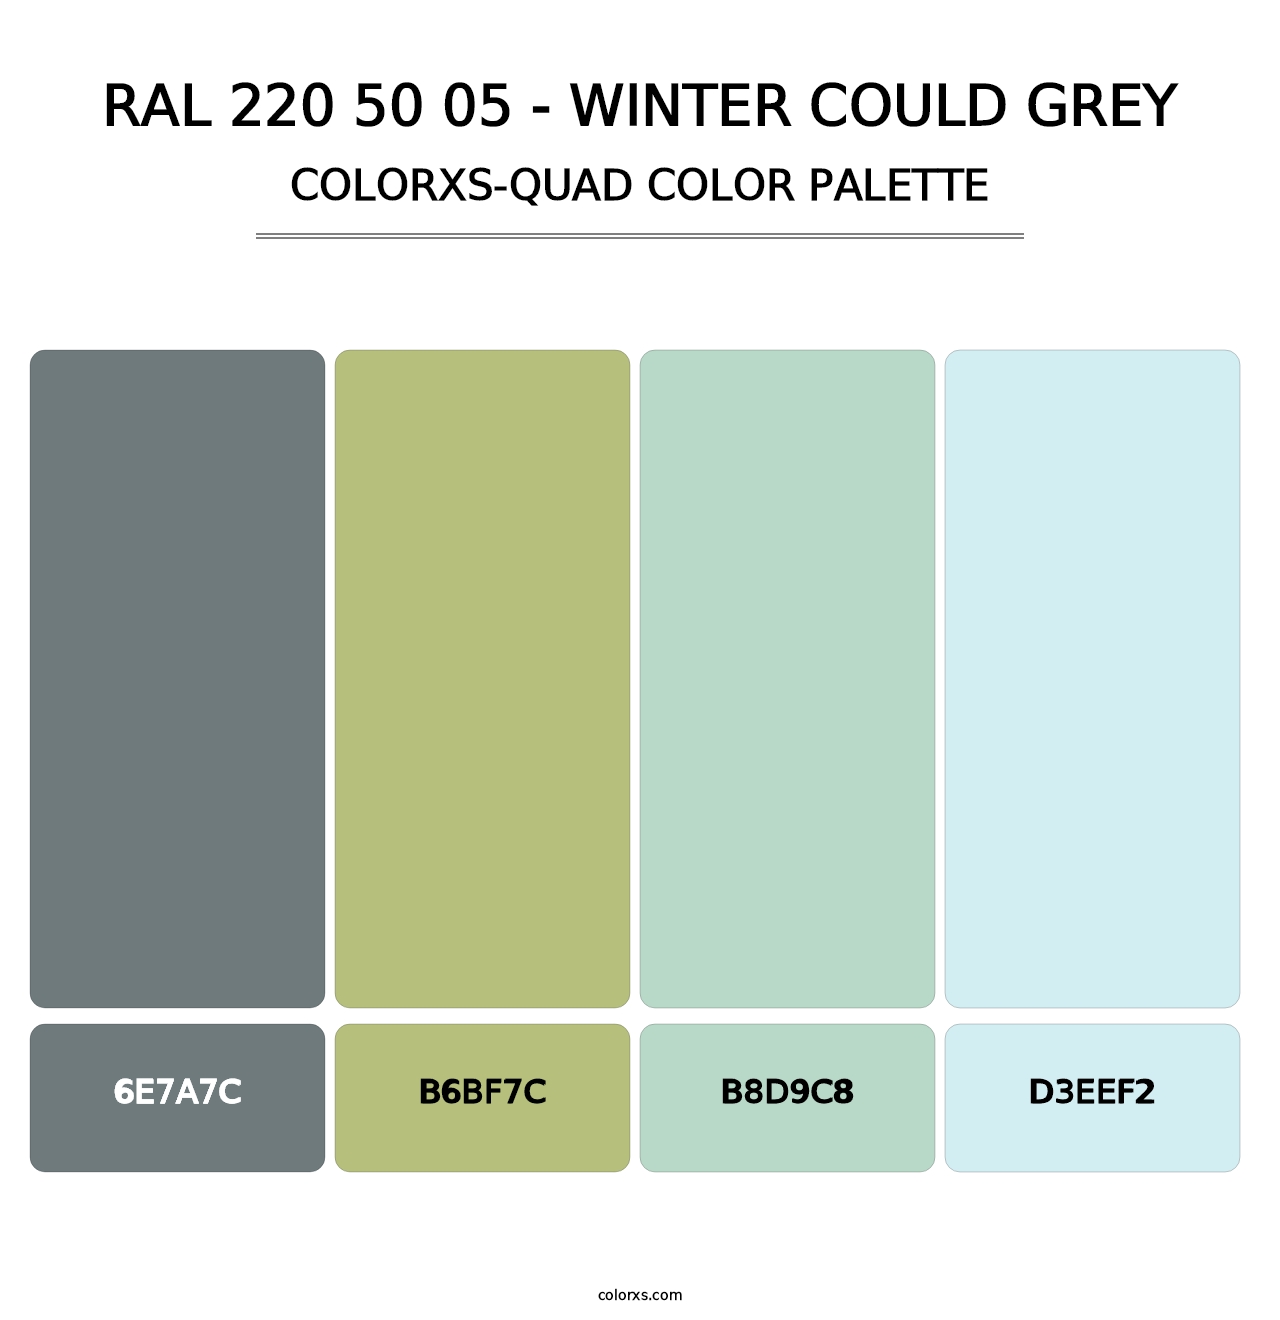 RAL 220 50 05 - Winter Could Grey - Colorxs Quad Palette